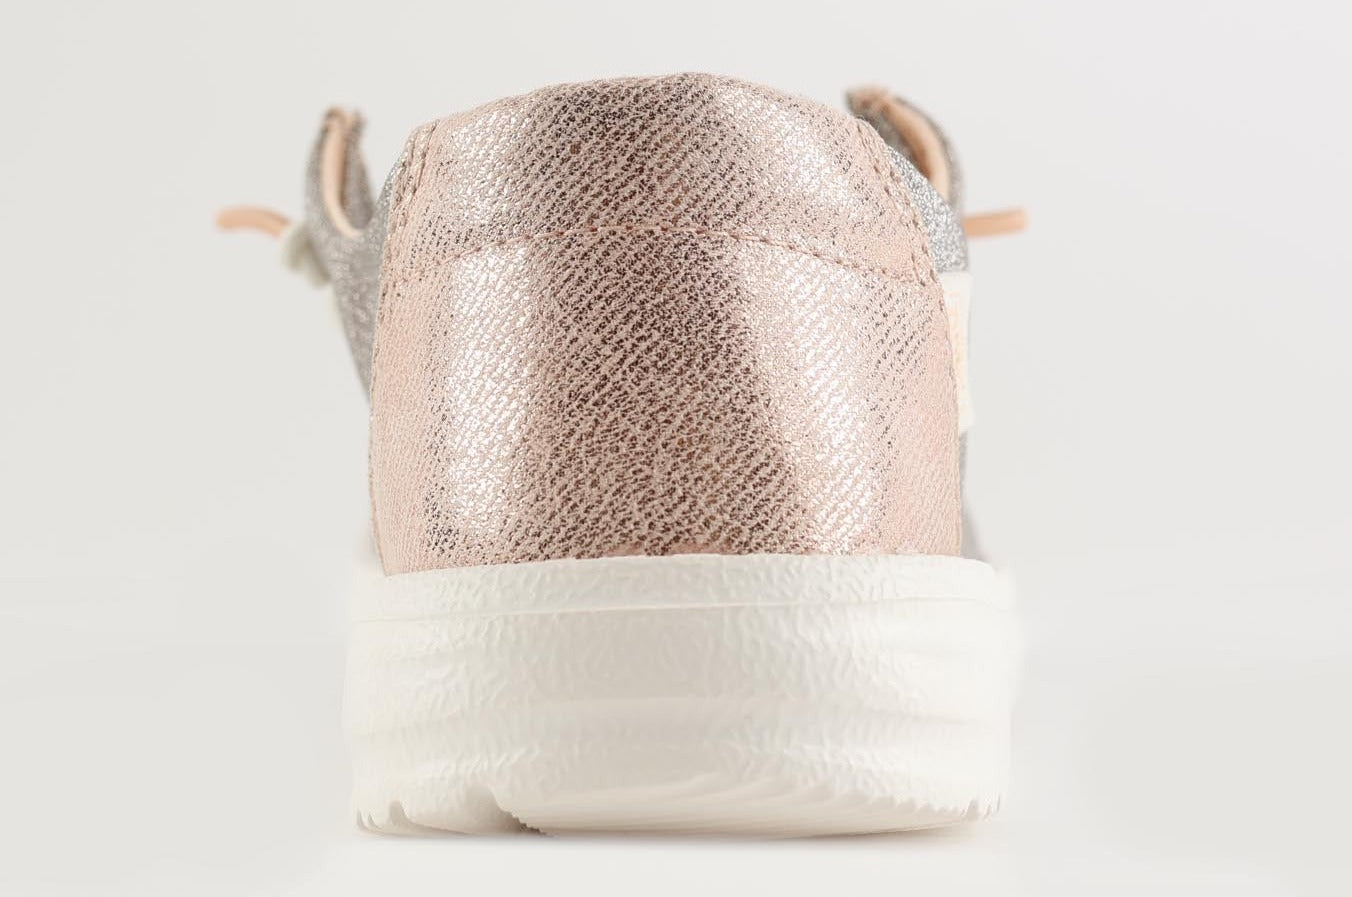 Wendy Metallic Sparkle in Rose Gold by Hey Dude Shoes